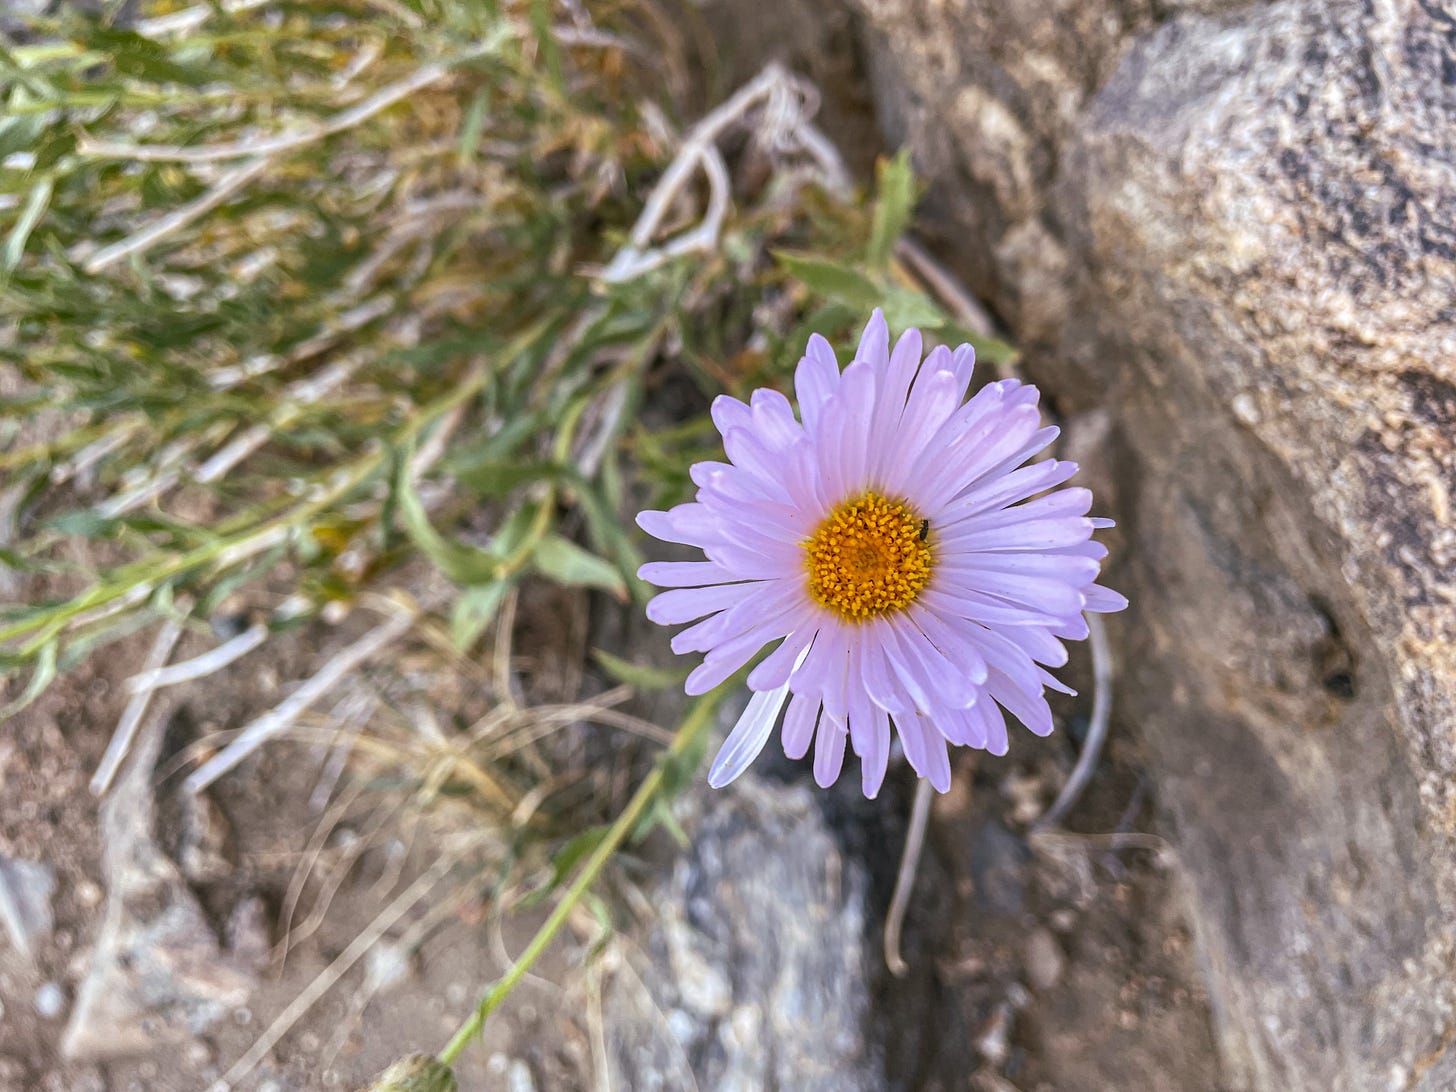 A small insect pollinates a desert daisy in Joshua Tree National Park.